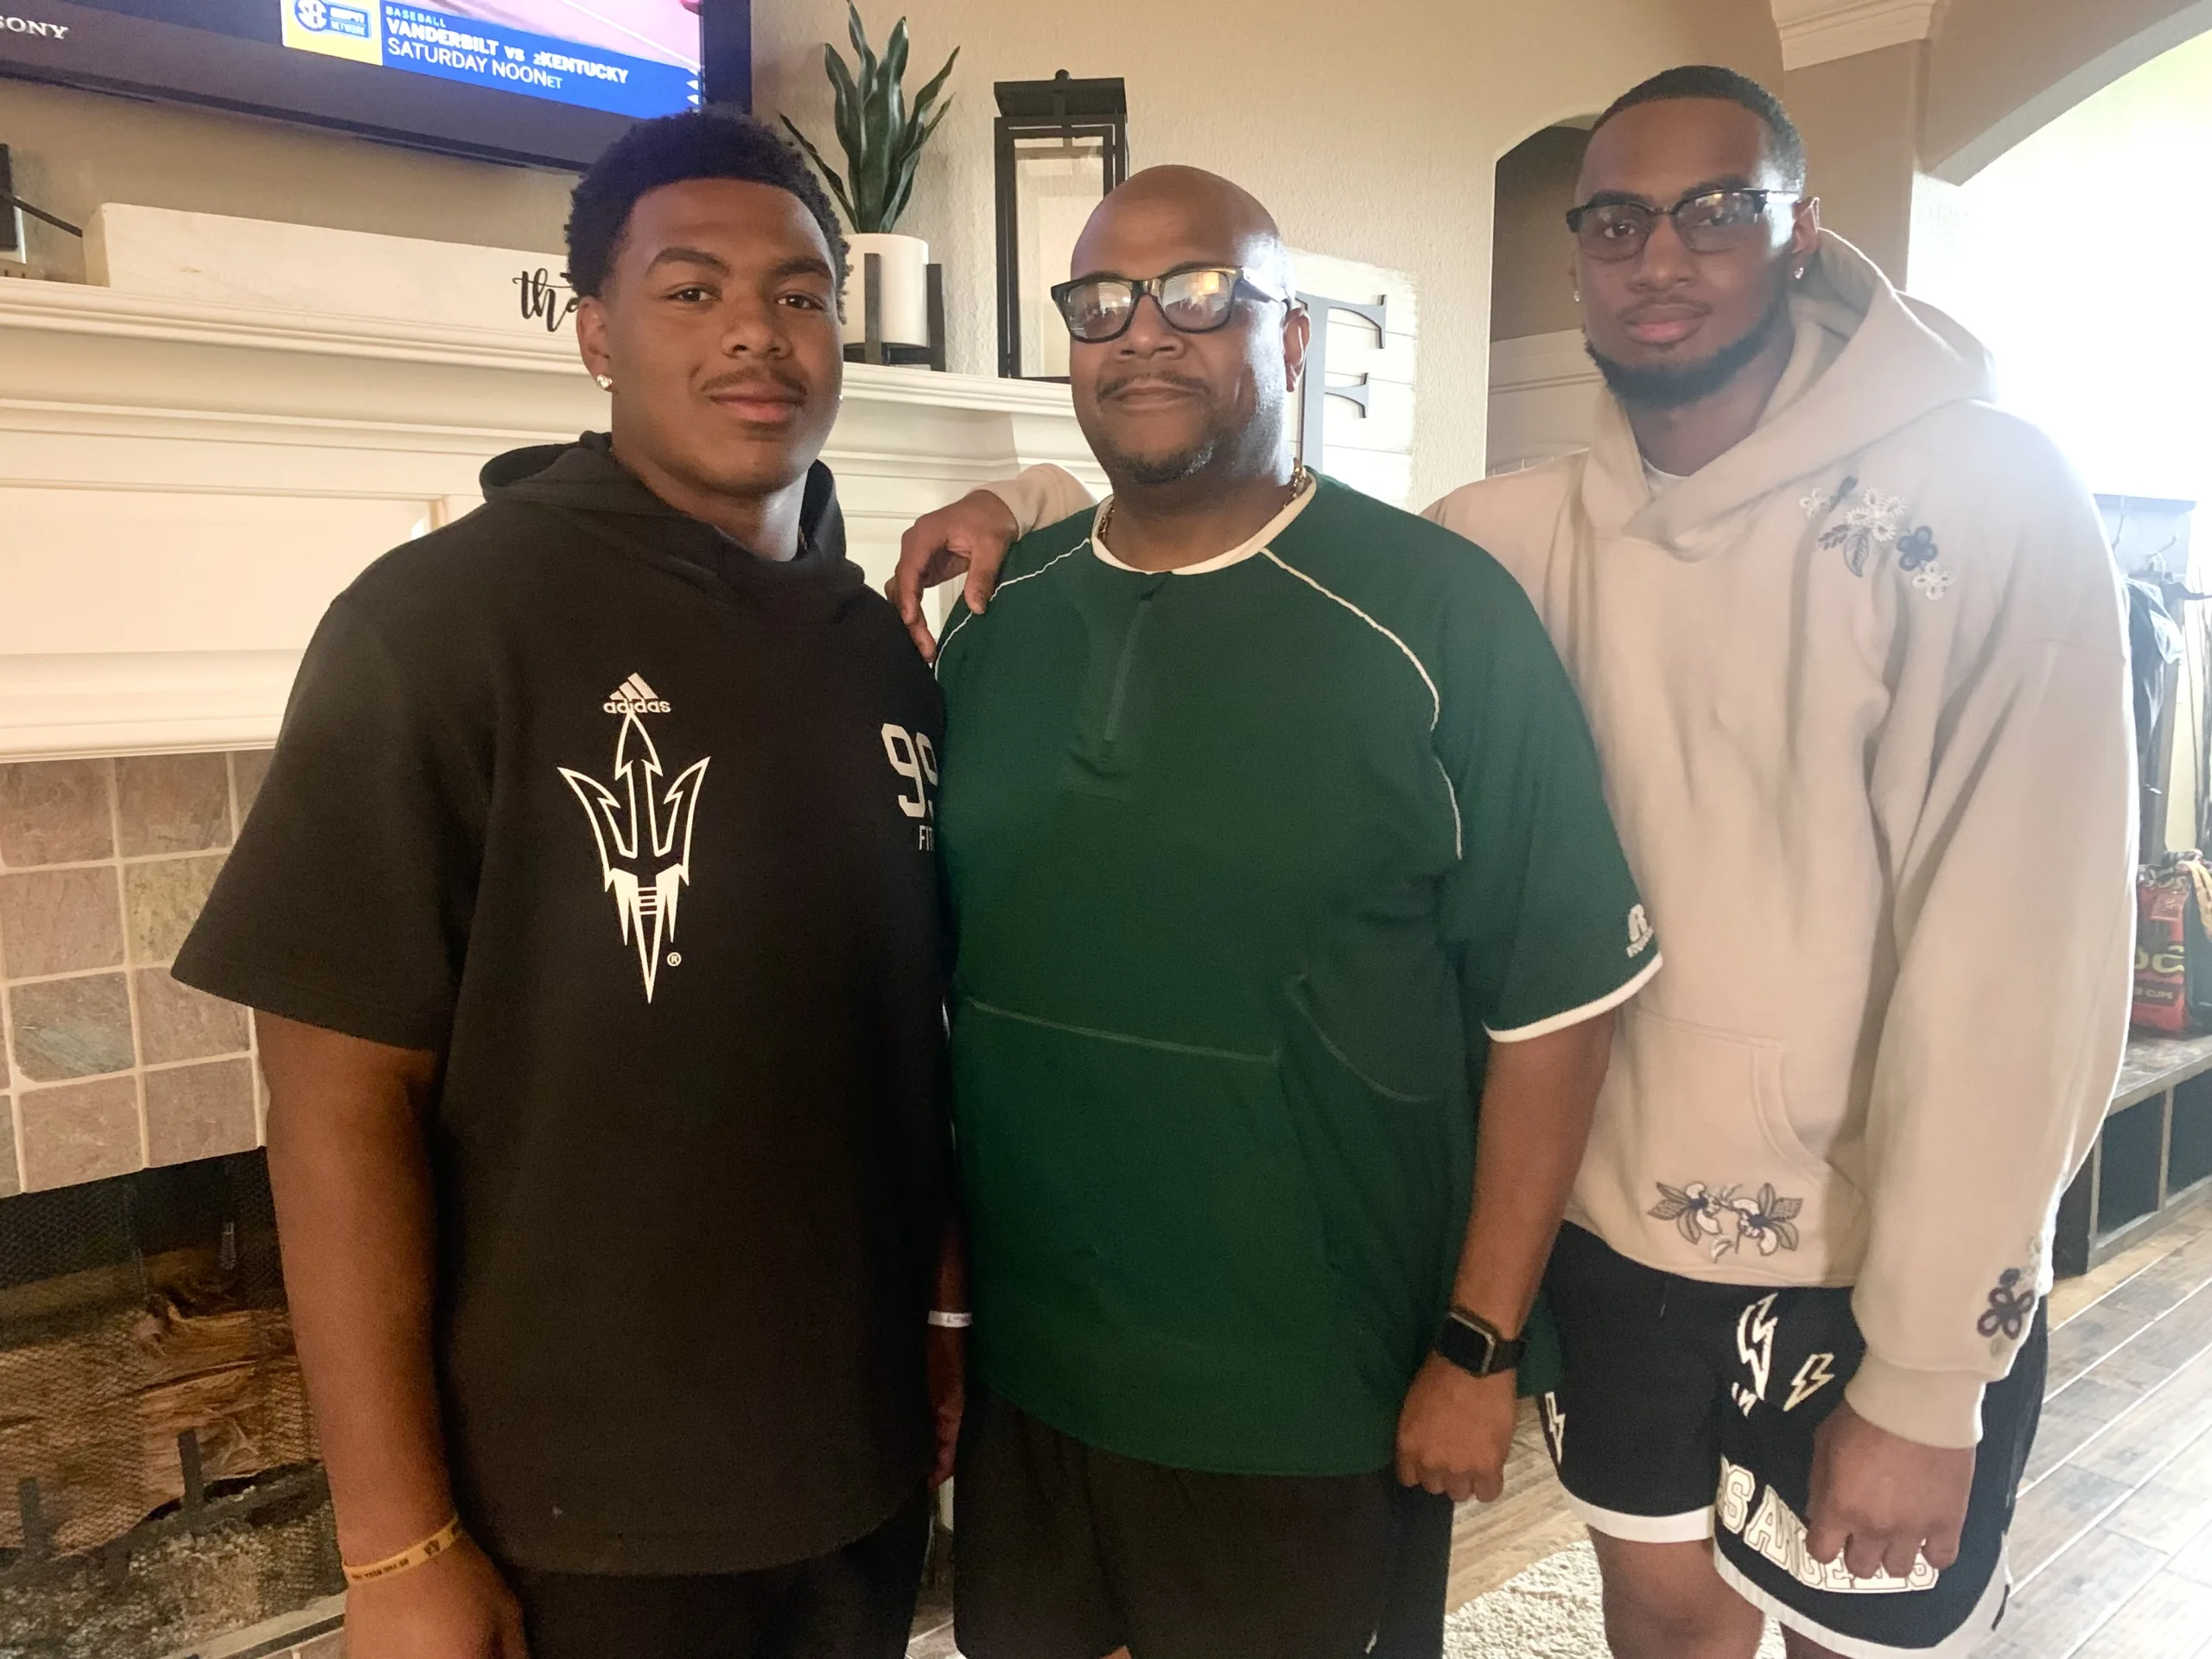 Drenon Fite (center) and his sons, C.J. (left), a defensive lineman at Arizona State, and Trey (right), a linebacker at Louisiana-Lafayette. (Photo by MITCH LUCAS - THEFOOTBALLBEAT.COM)